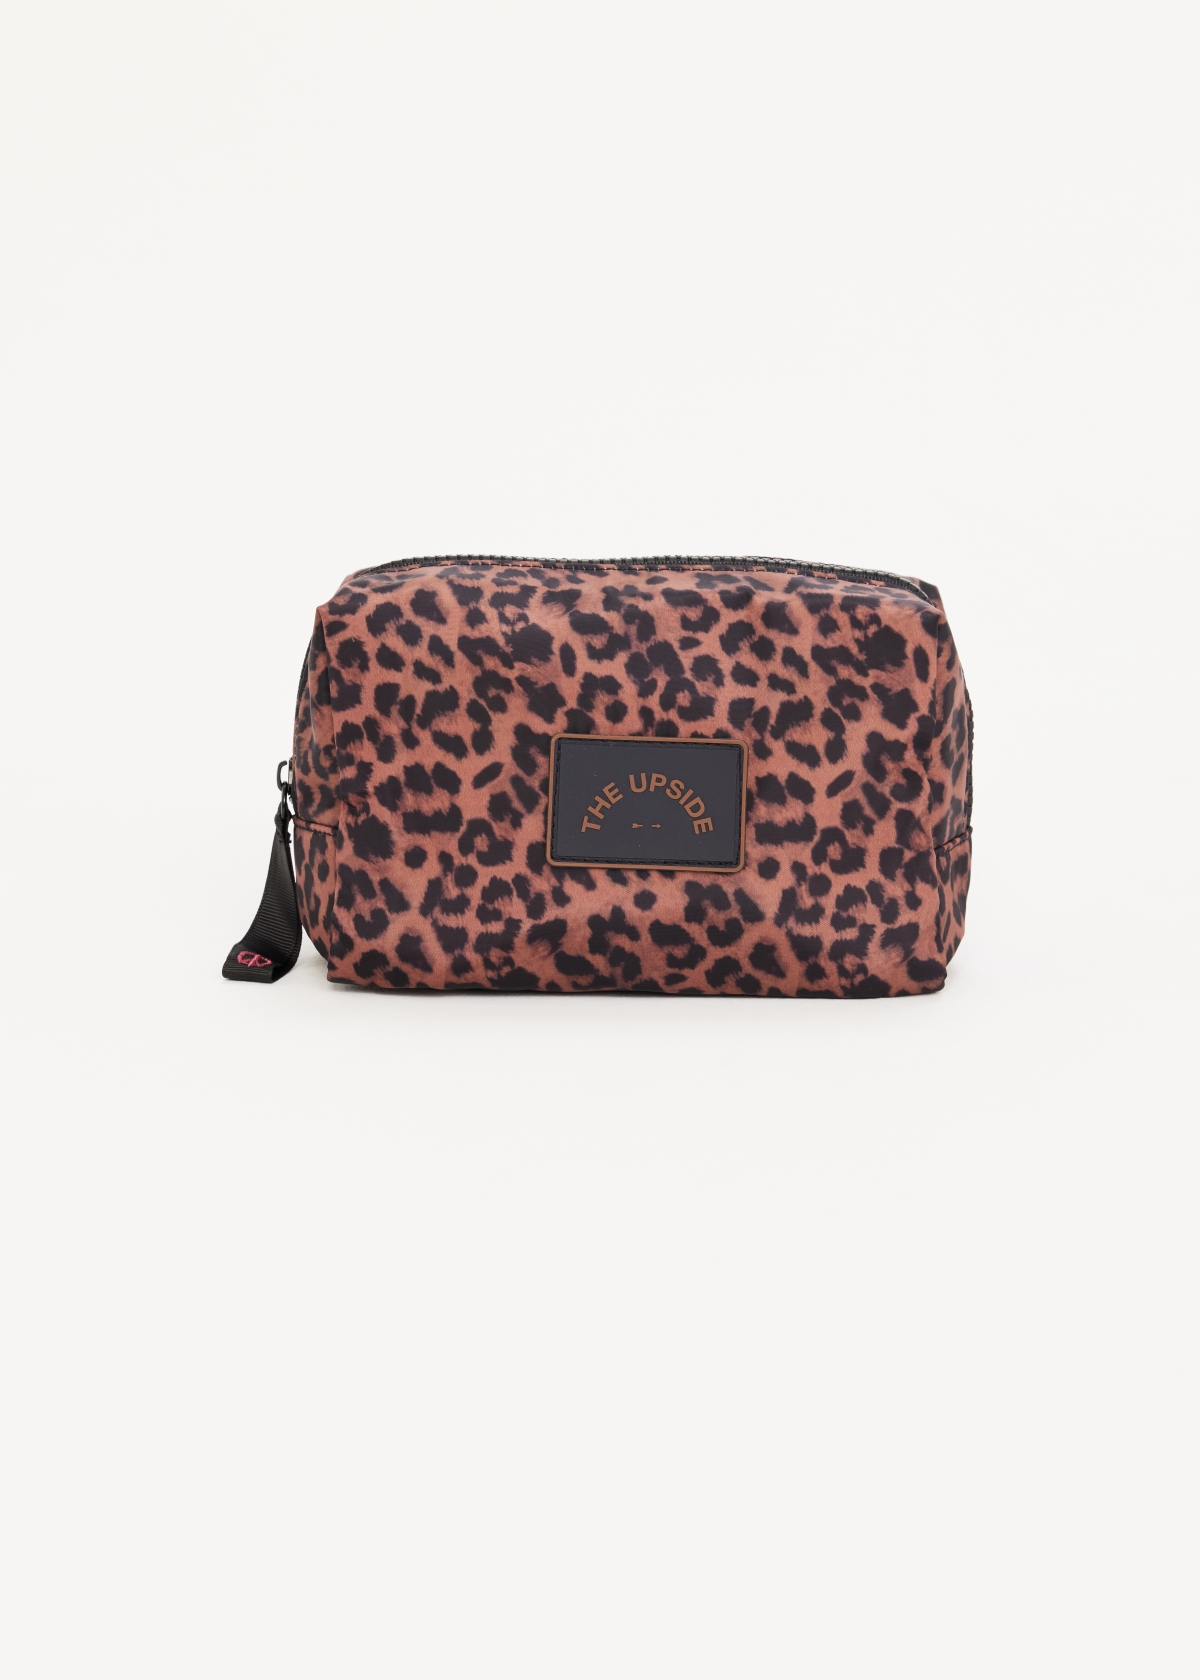 BIARRITZ COSMETIC POUCH in LEOPARD | The UPSIDE